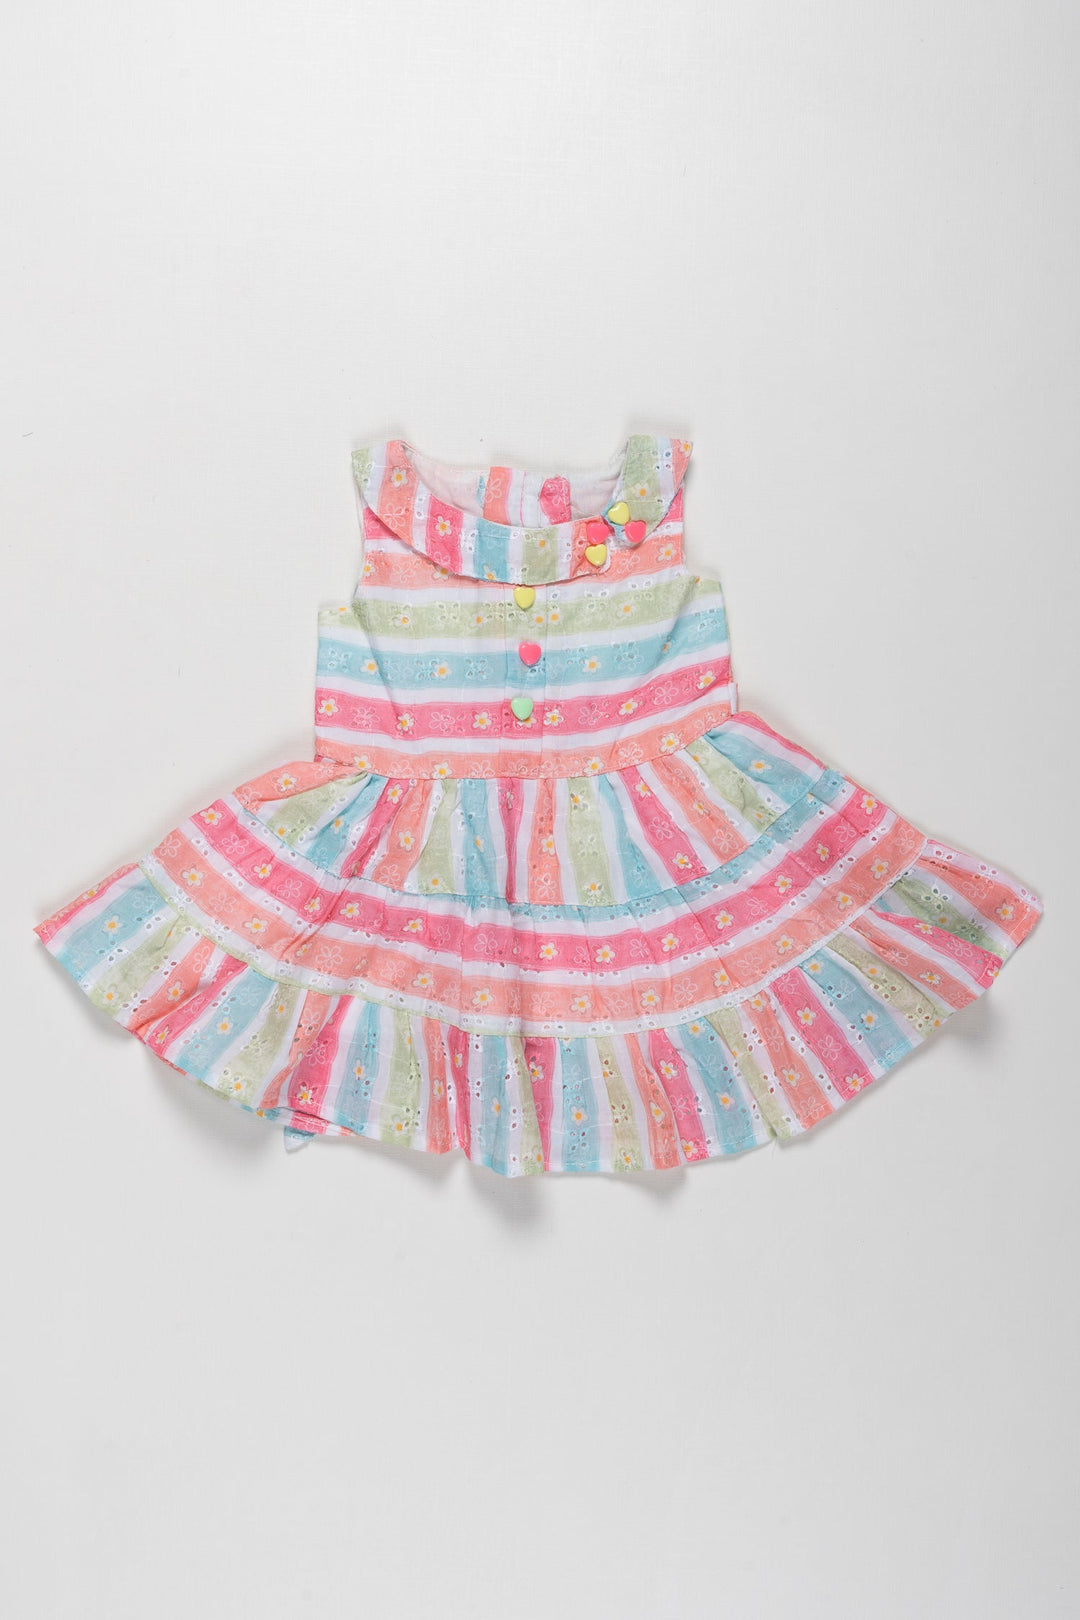 The Nesavu Girls Cotton Frock Rainbow Stripe Chikan Embroidered Cotton Frock for Girls - Vibrant and Versatile Nesavu Buy Embroidered Cotton Frock for Girls | Colorful Daily & Party Dress Online | The Nesavu